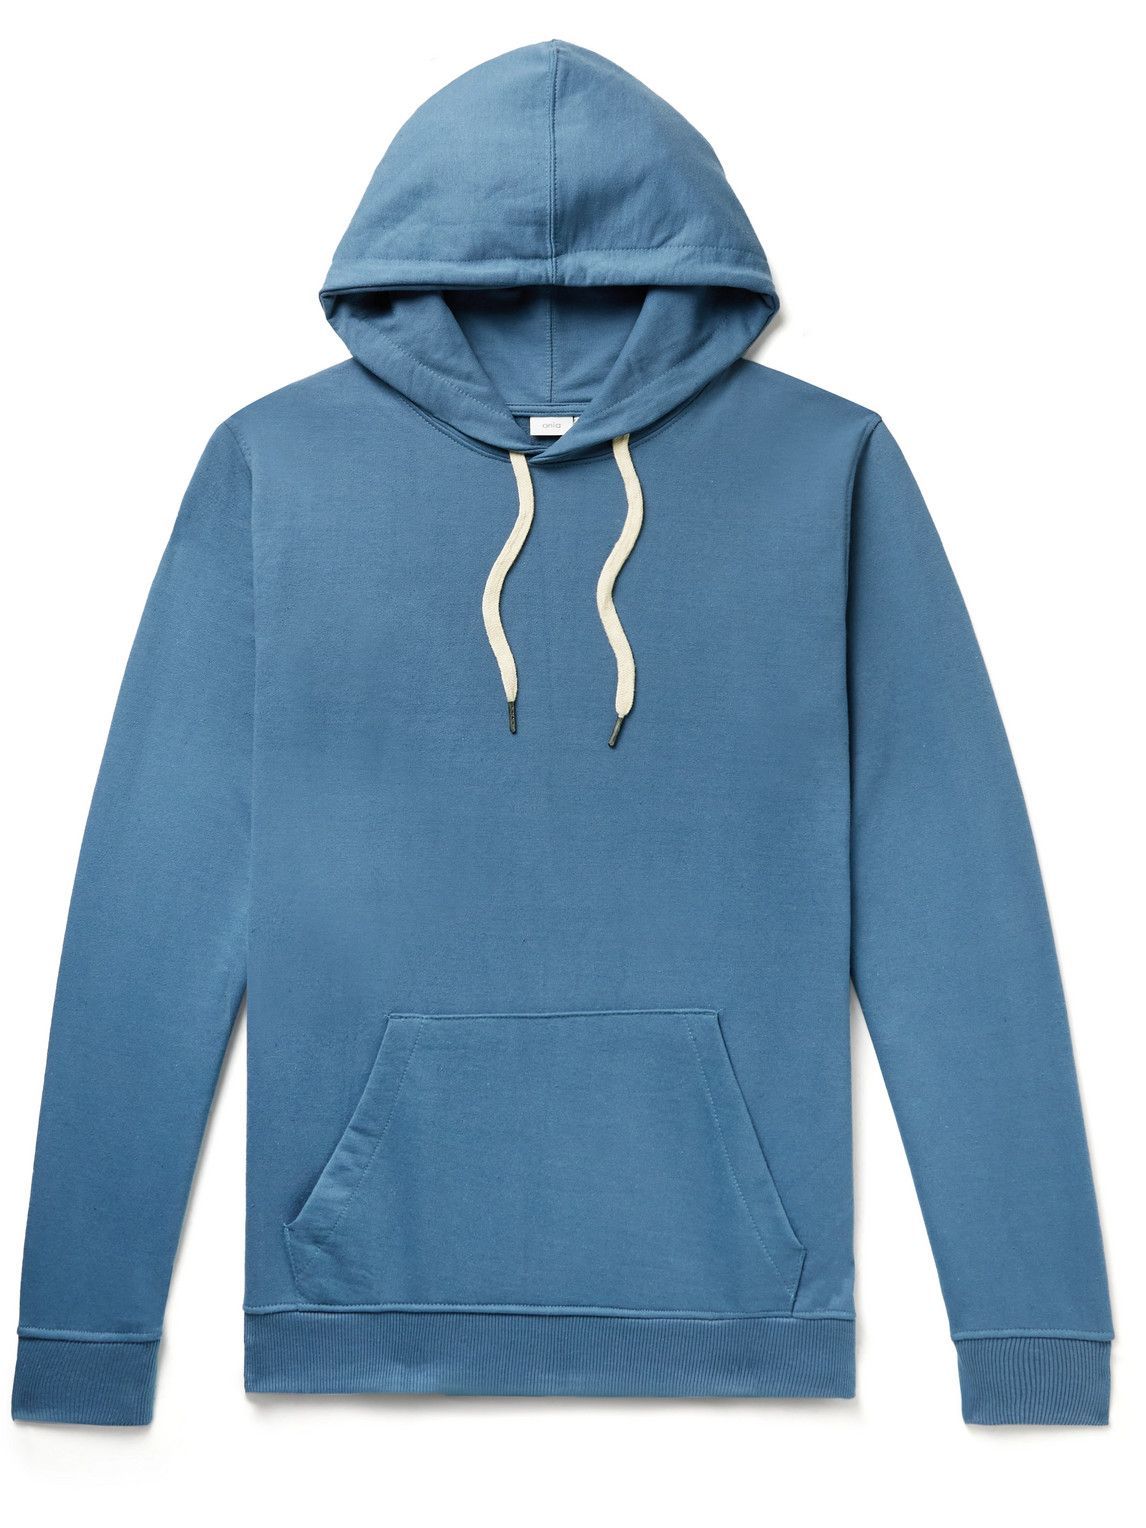 Onia - Cotton-Blend Jersey Hoodie - Blue Onia